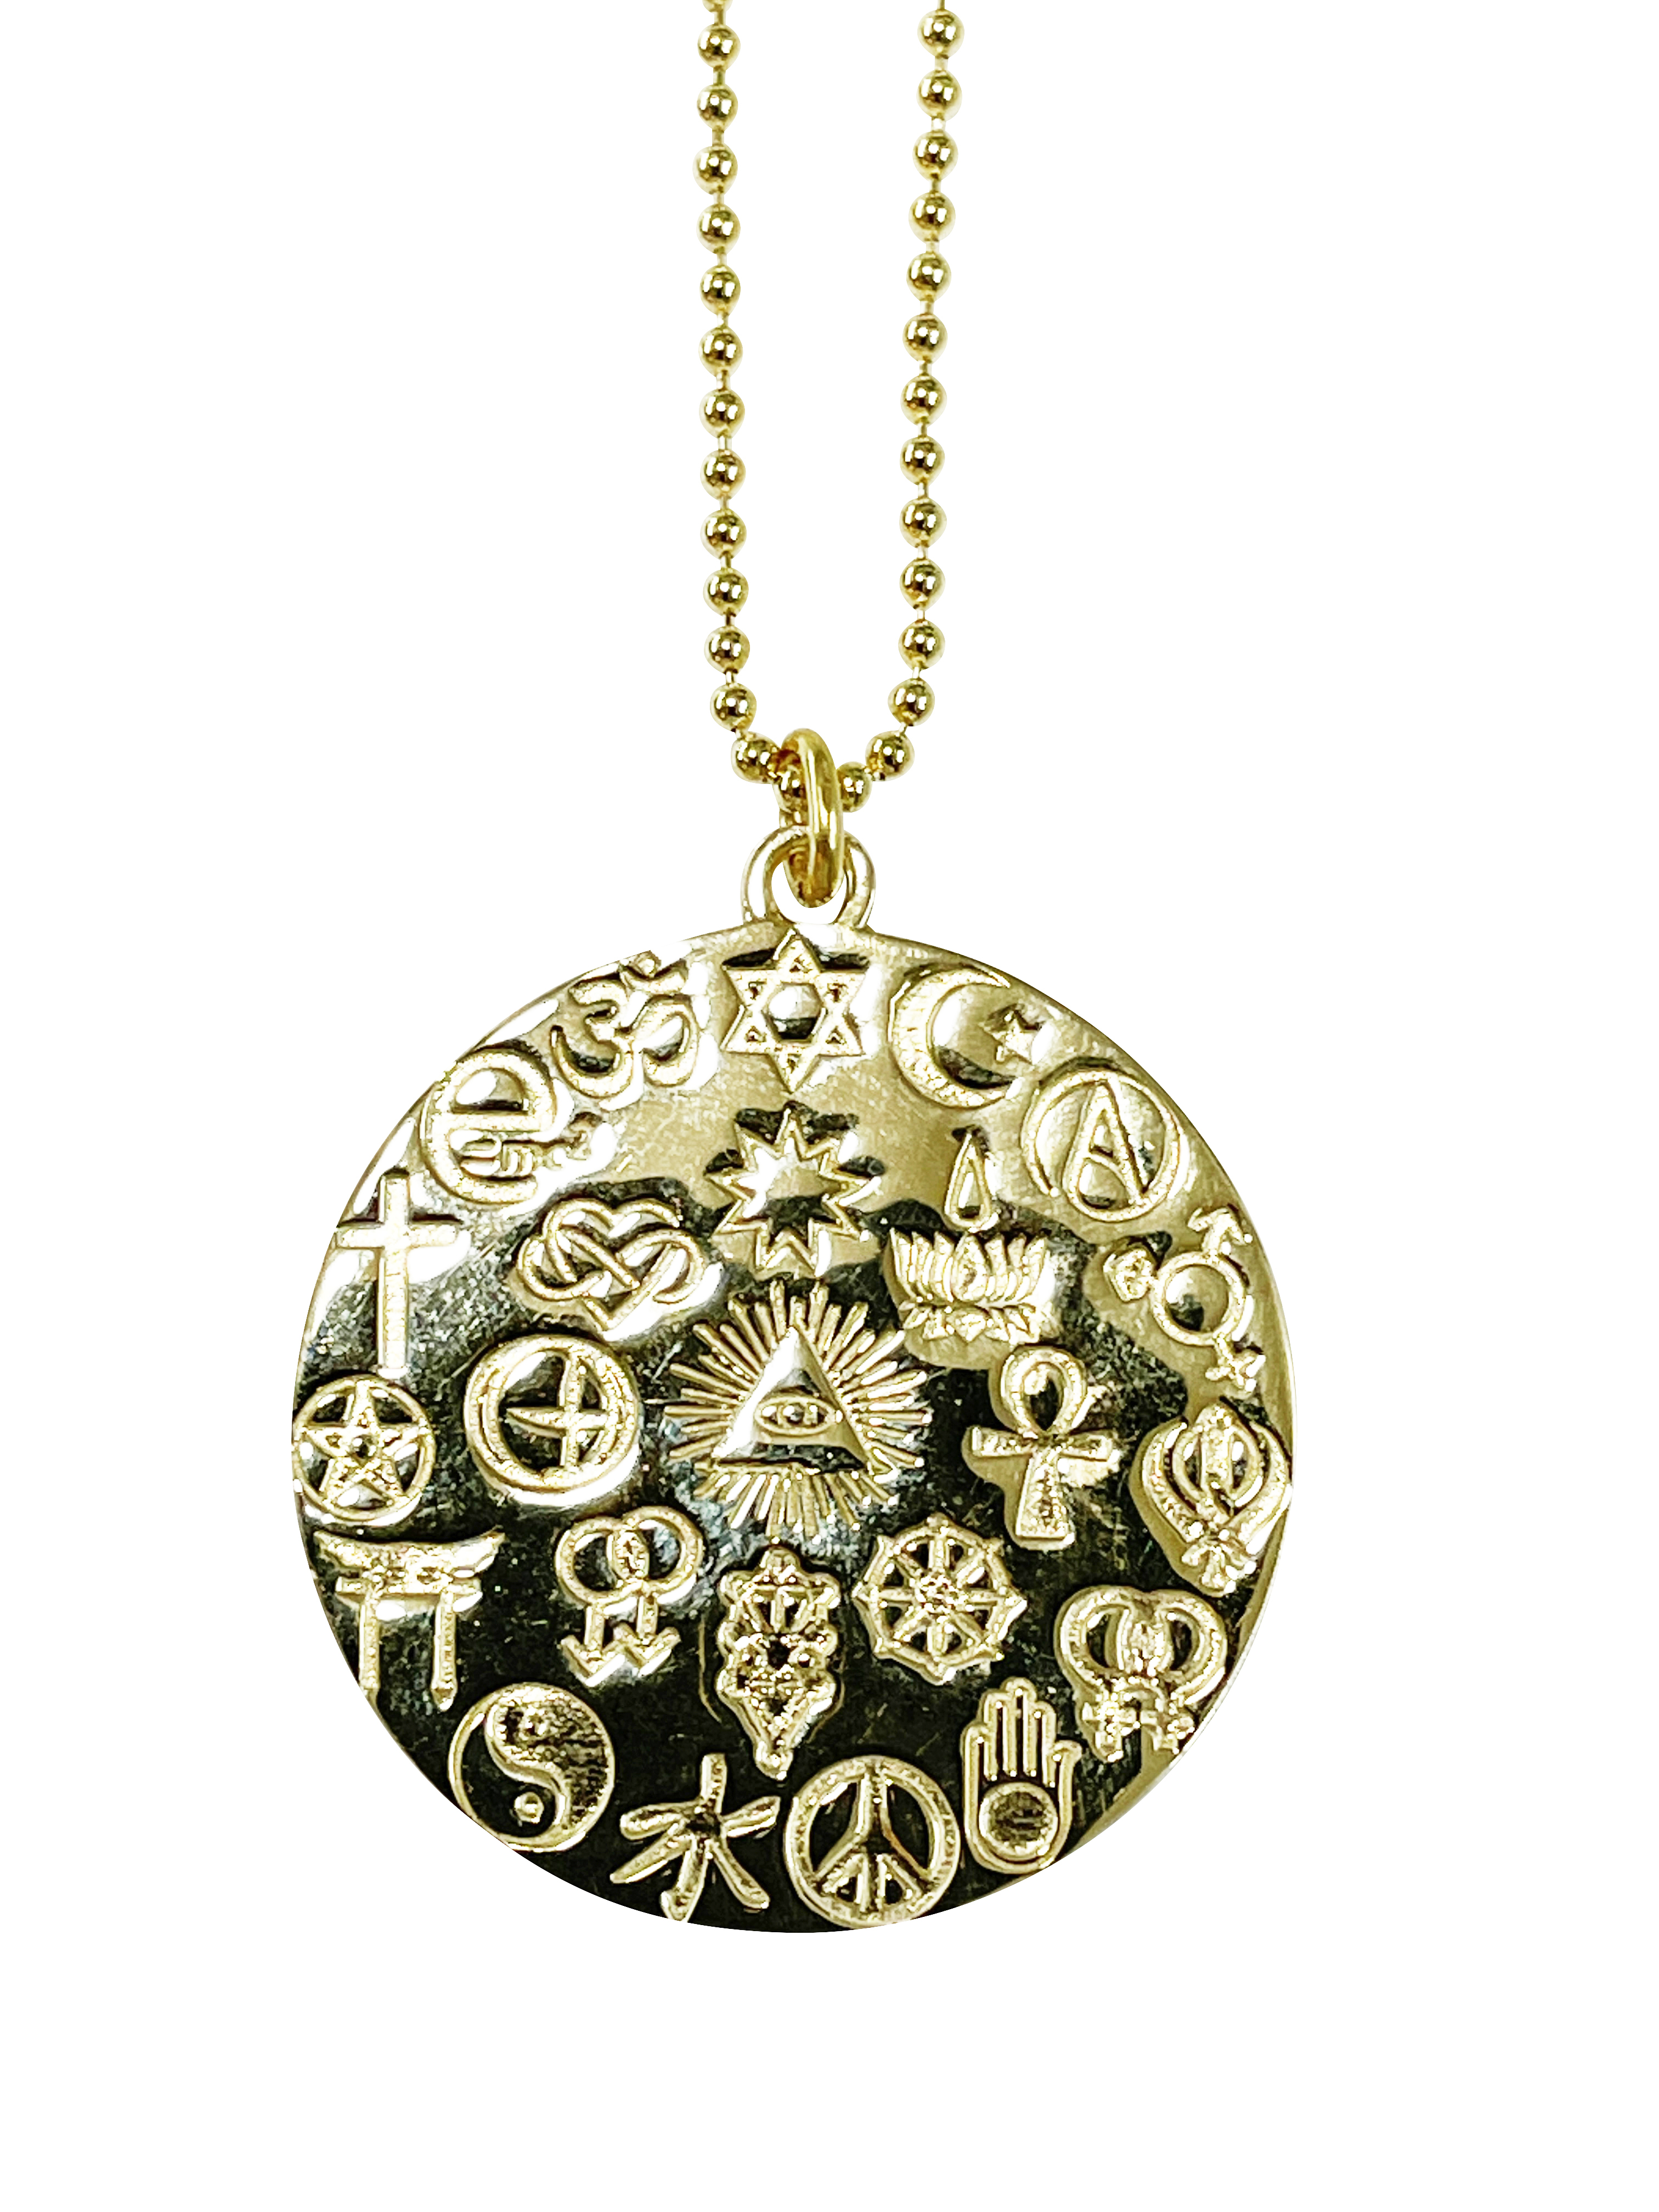 New York Central Park Map Jewelry. Necklaces and Earrings. Dogtags. A  Unique Gift Idea. — AMINIMAL